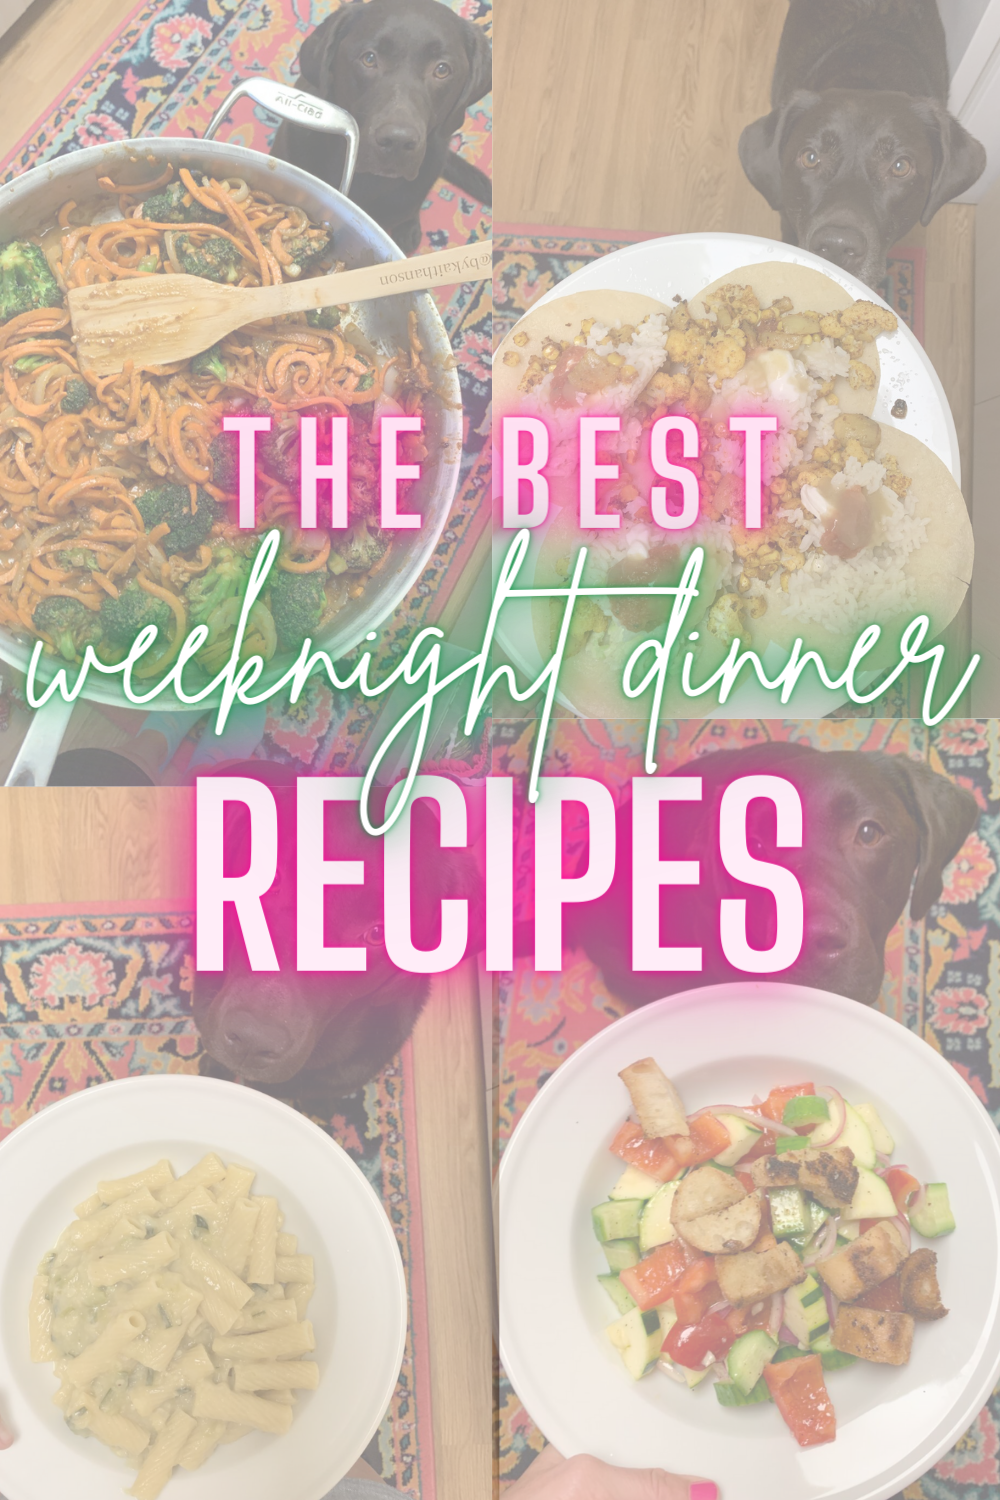 My Favorite Weeknight Dinner Recipes - In a rut for what to make for dinner this week? I'm sharing my favorite weeknight dinner recipes that the whole family will enjoy!